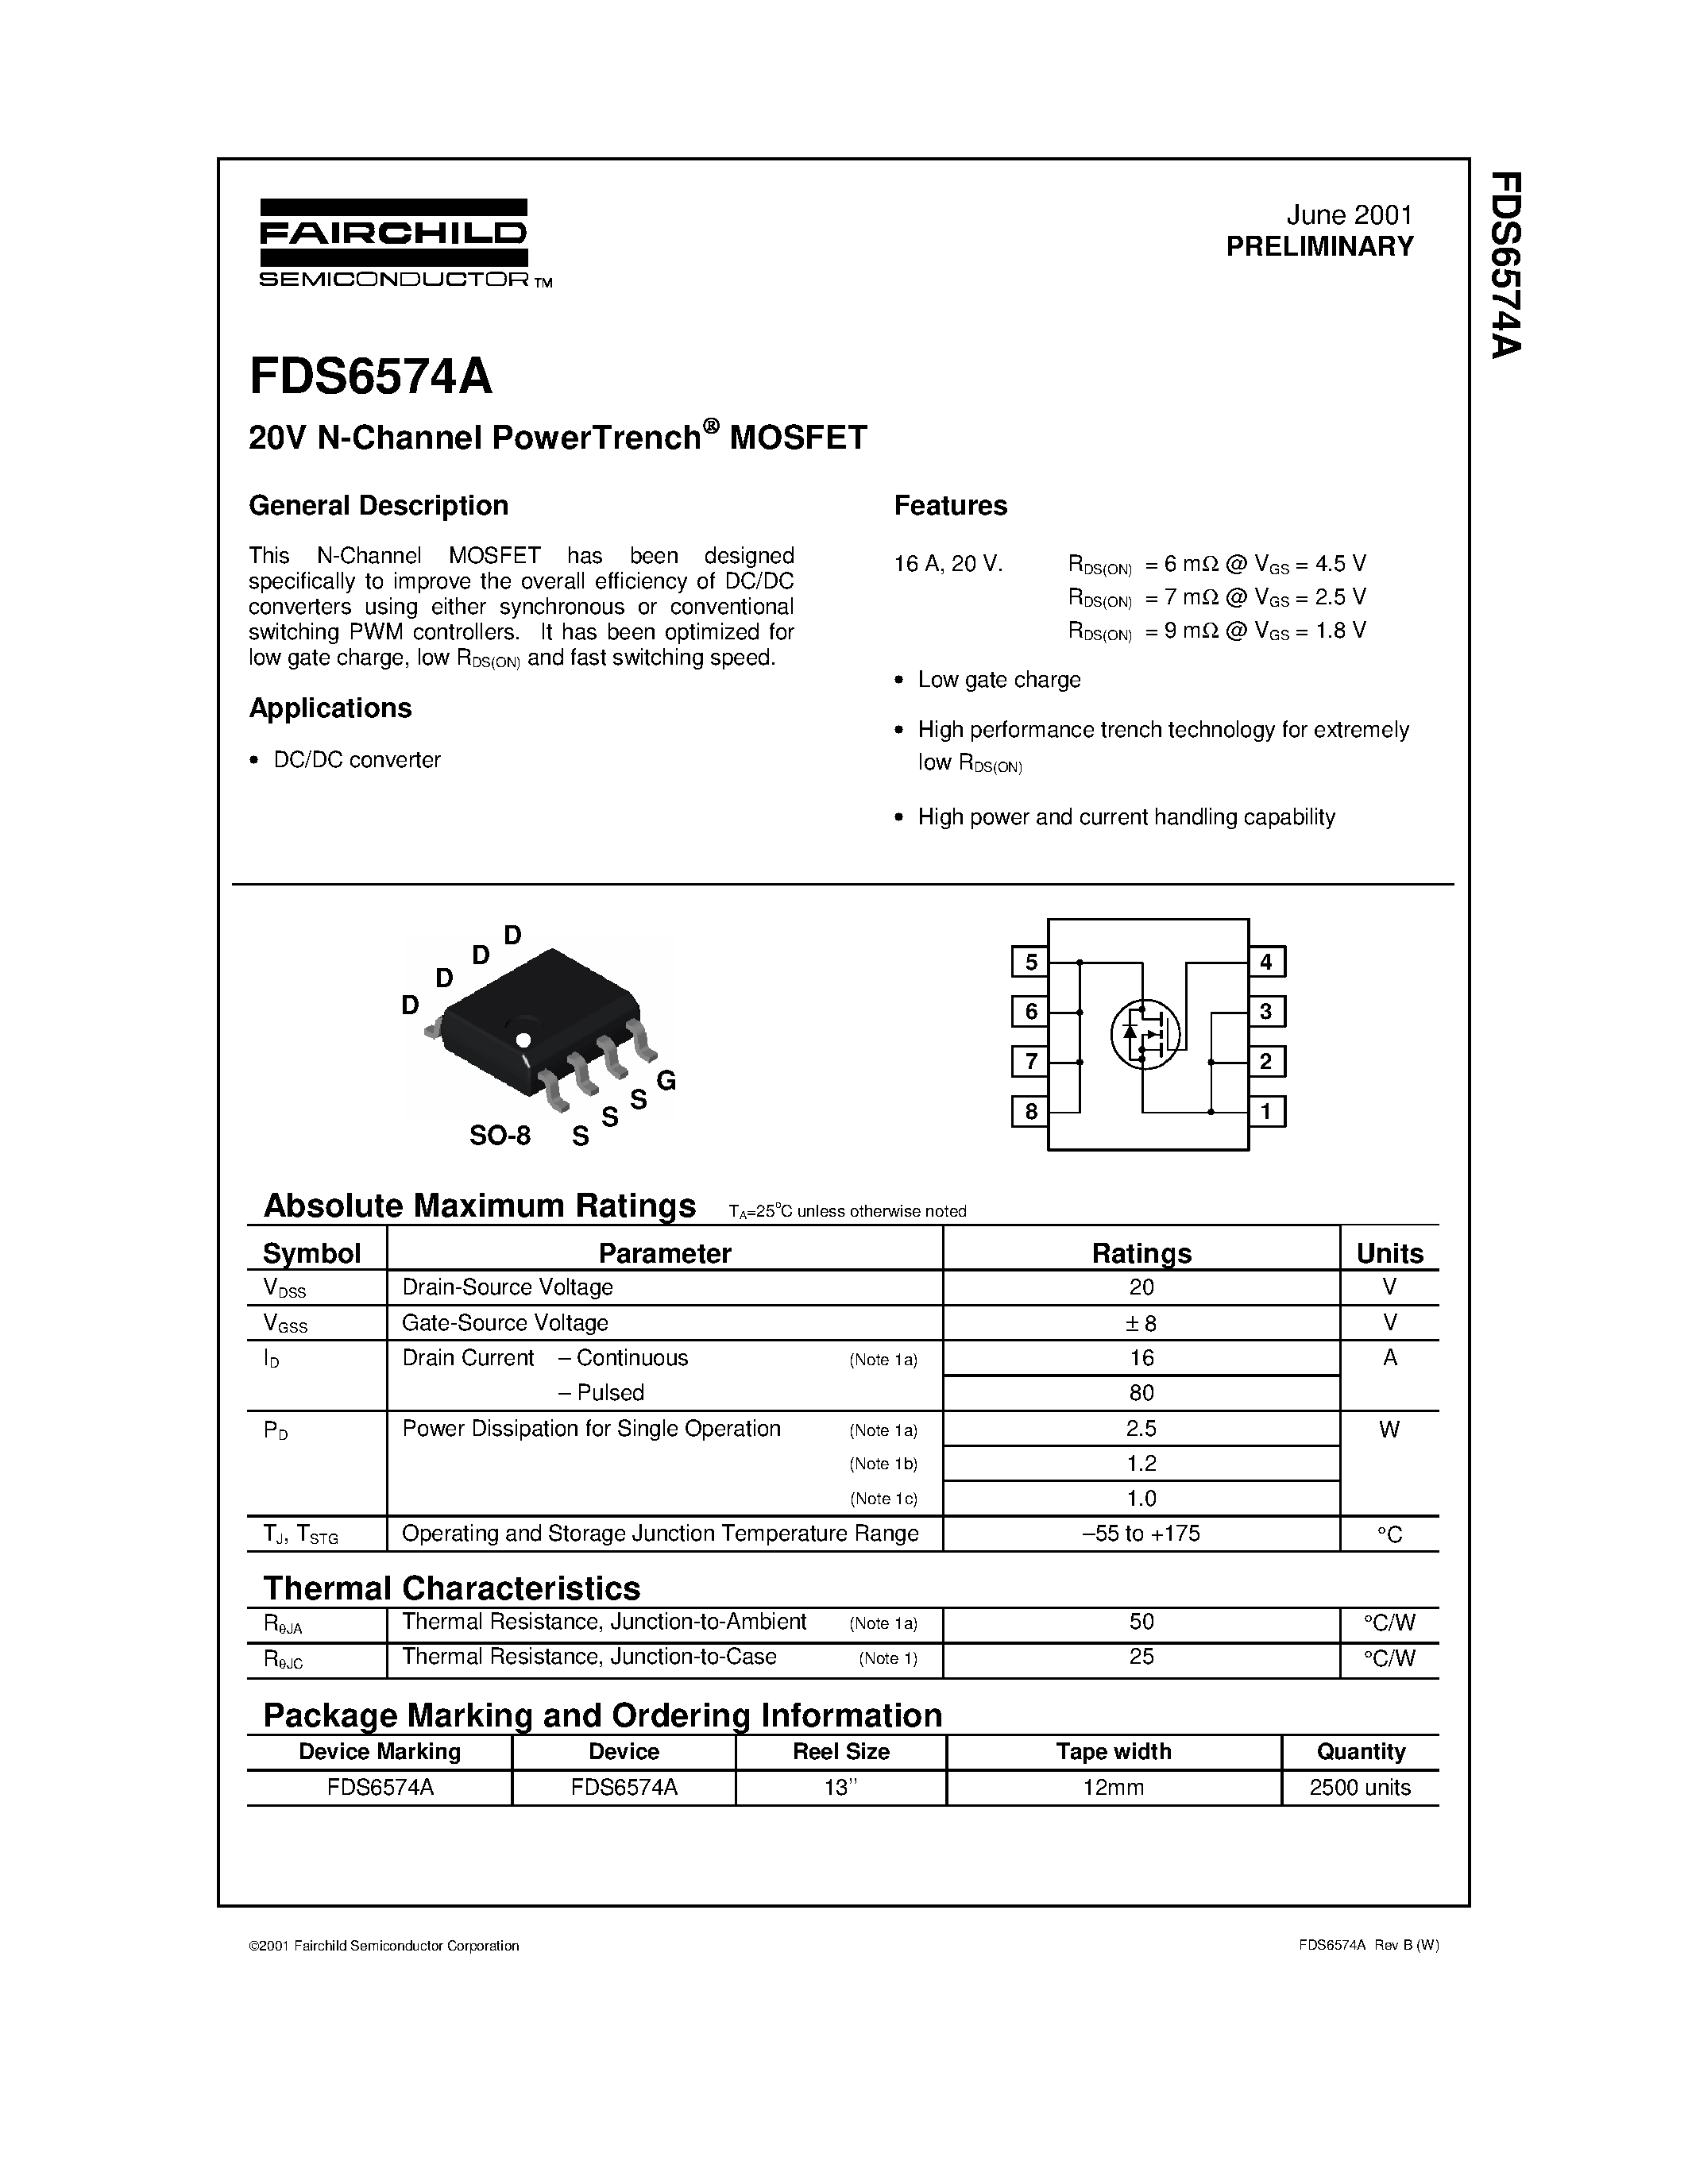 Datasheet FDS6574A - 20V N-Channel PowerTrench MOSFET page 1